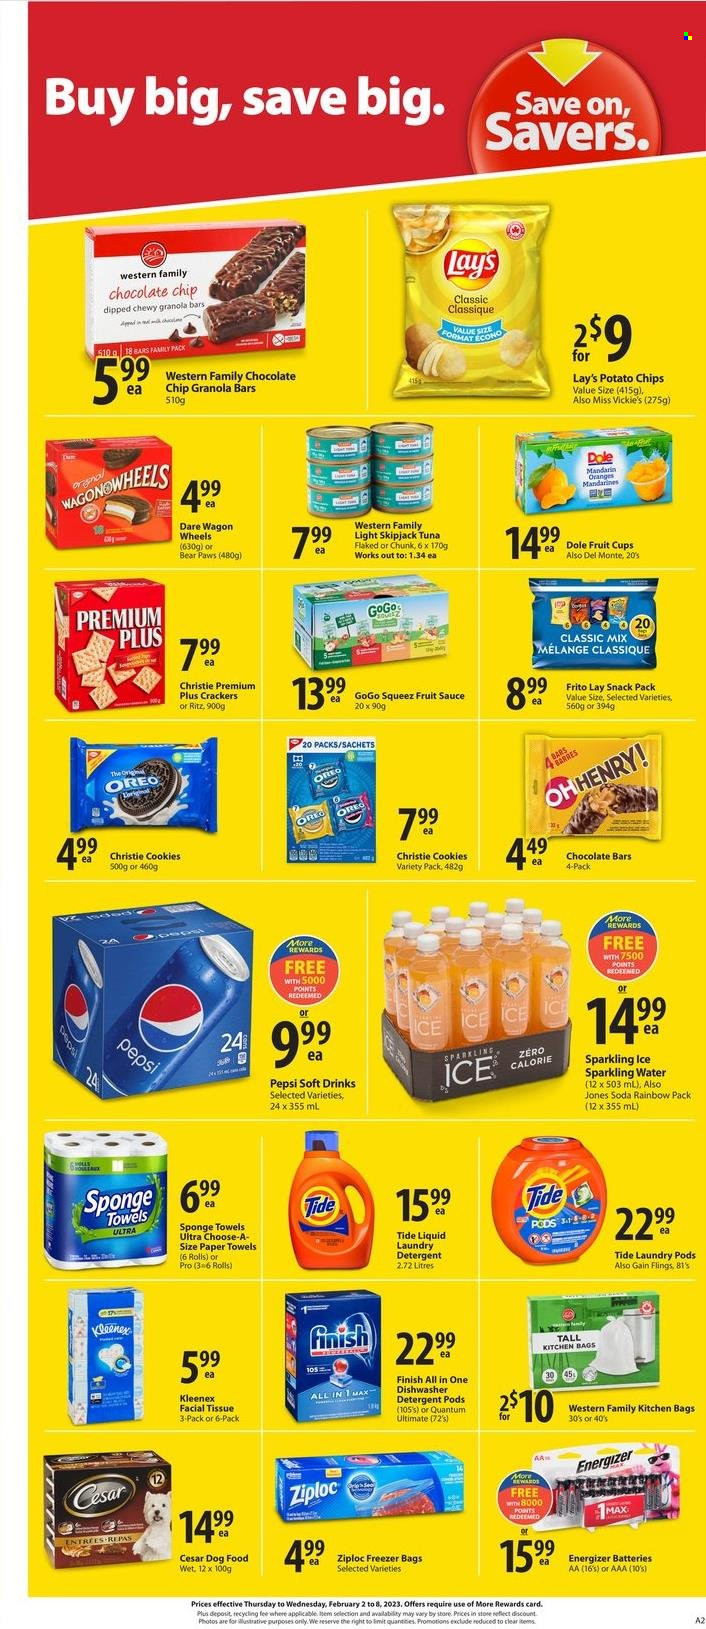 thumbnail - Save-On-Foods Flyer - February 02, 2023 - February 08, 2023 - Sales products - Dole, mandarines, fruit cup, oranges, sauce, cookies, crackers, RITZ, chocolate bar, potato chips, chips, Lay’s, Del Monte, granola bar, Pepsi, soft drink, soda, sparkling water, Kleenex, tissues, kitchen towels, paper towels, Gain, Tide, laundry detergent, freezer bag, Ziploc, animal food, dog food, detergent, Energizer, Oreo. Page 4.